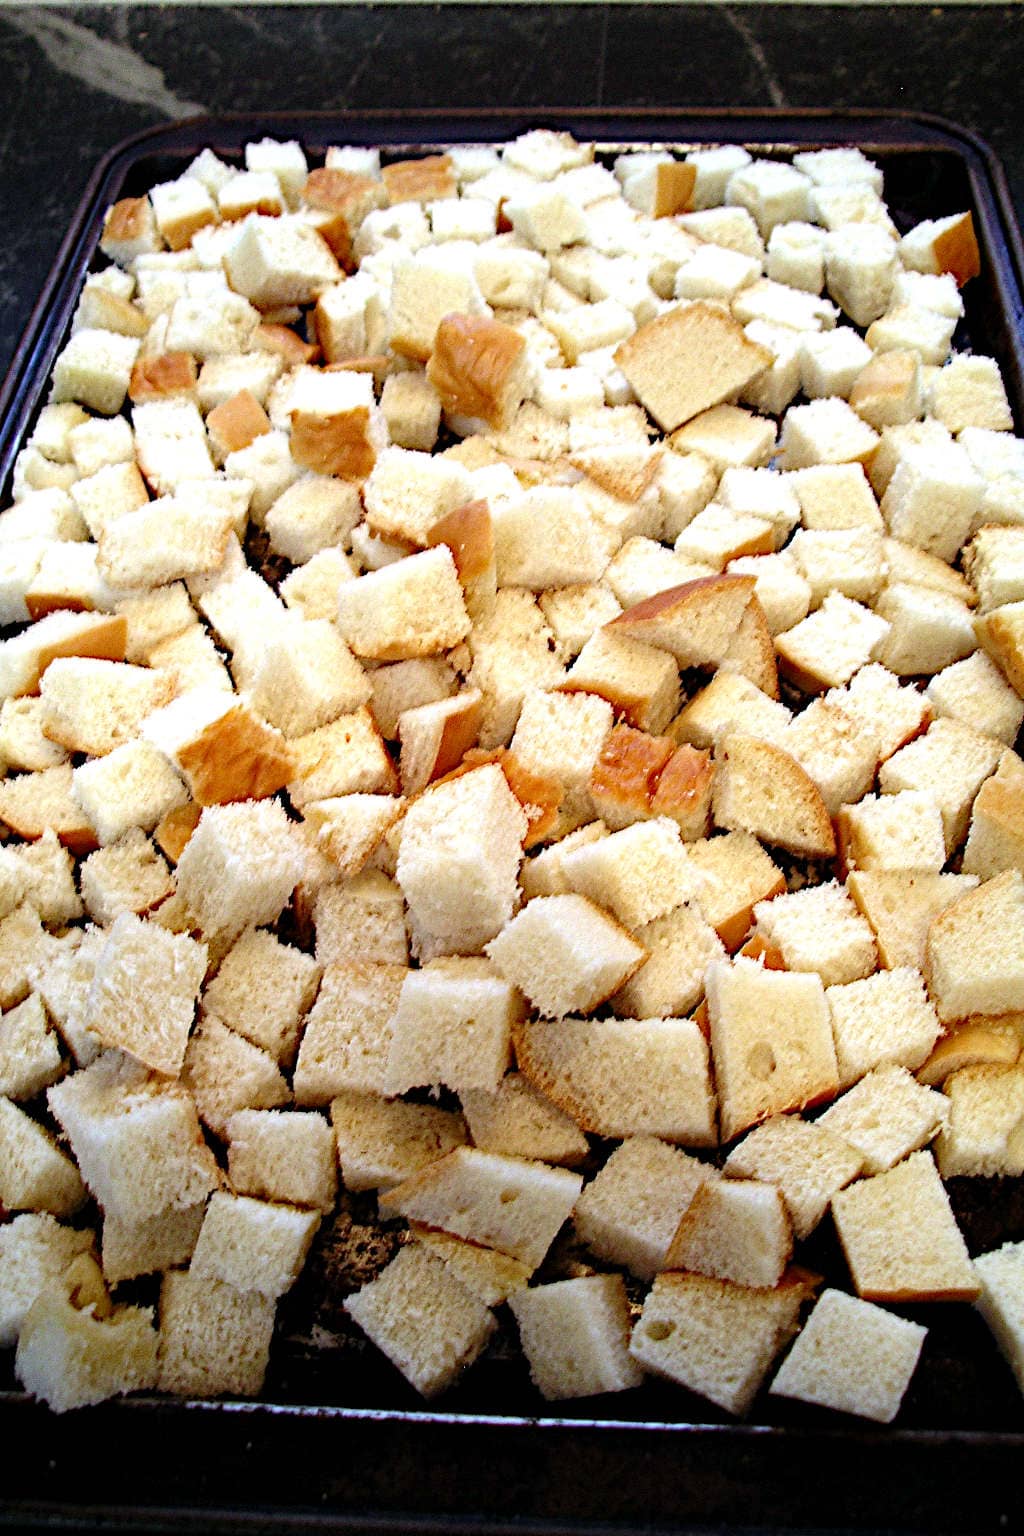 bread cubes laid out to stale slightly